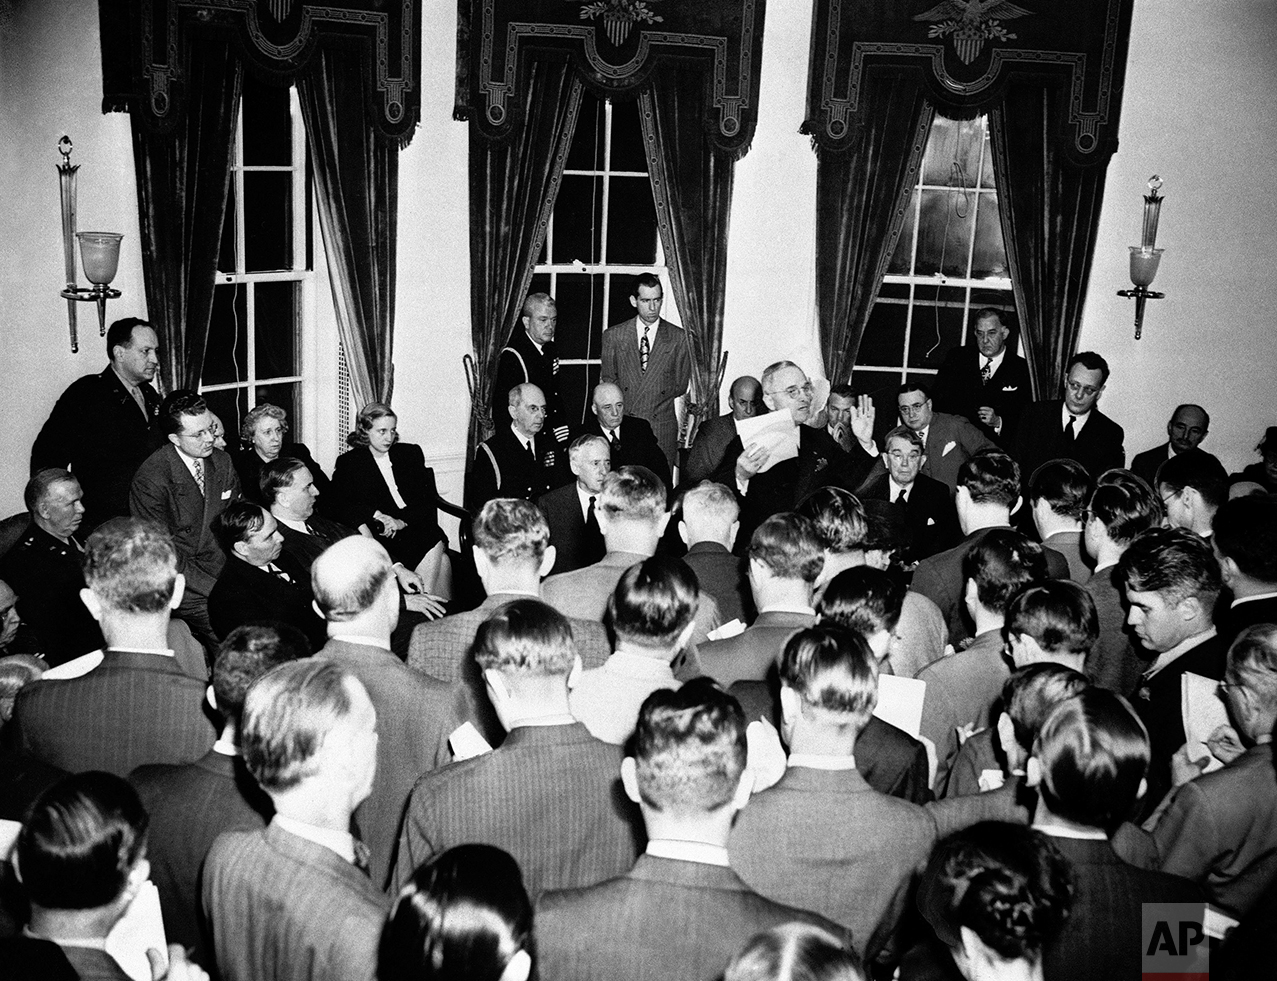  President Harry S. Truman (right center), gestures as he tells newsmen details of surrender of Germany during press conference at the White House in Washington, May 8, 1945 attended by 123 reporters. (AP Photo) 